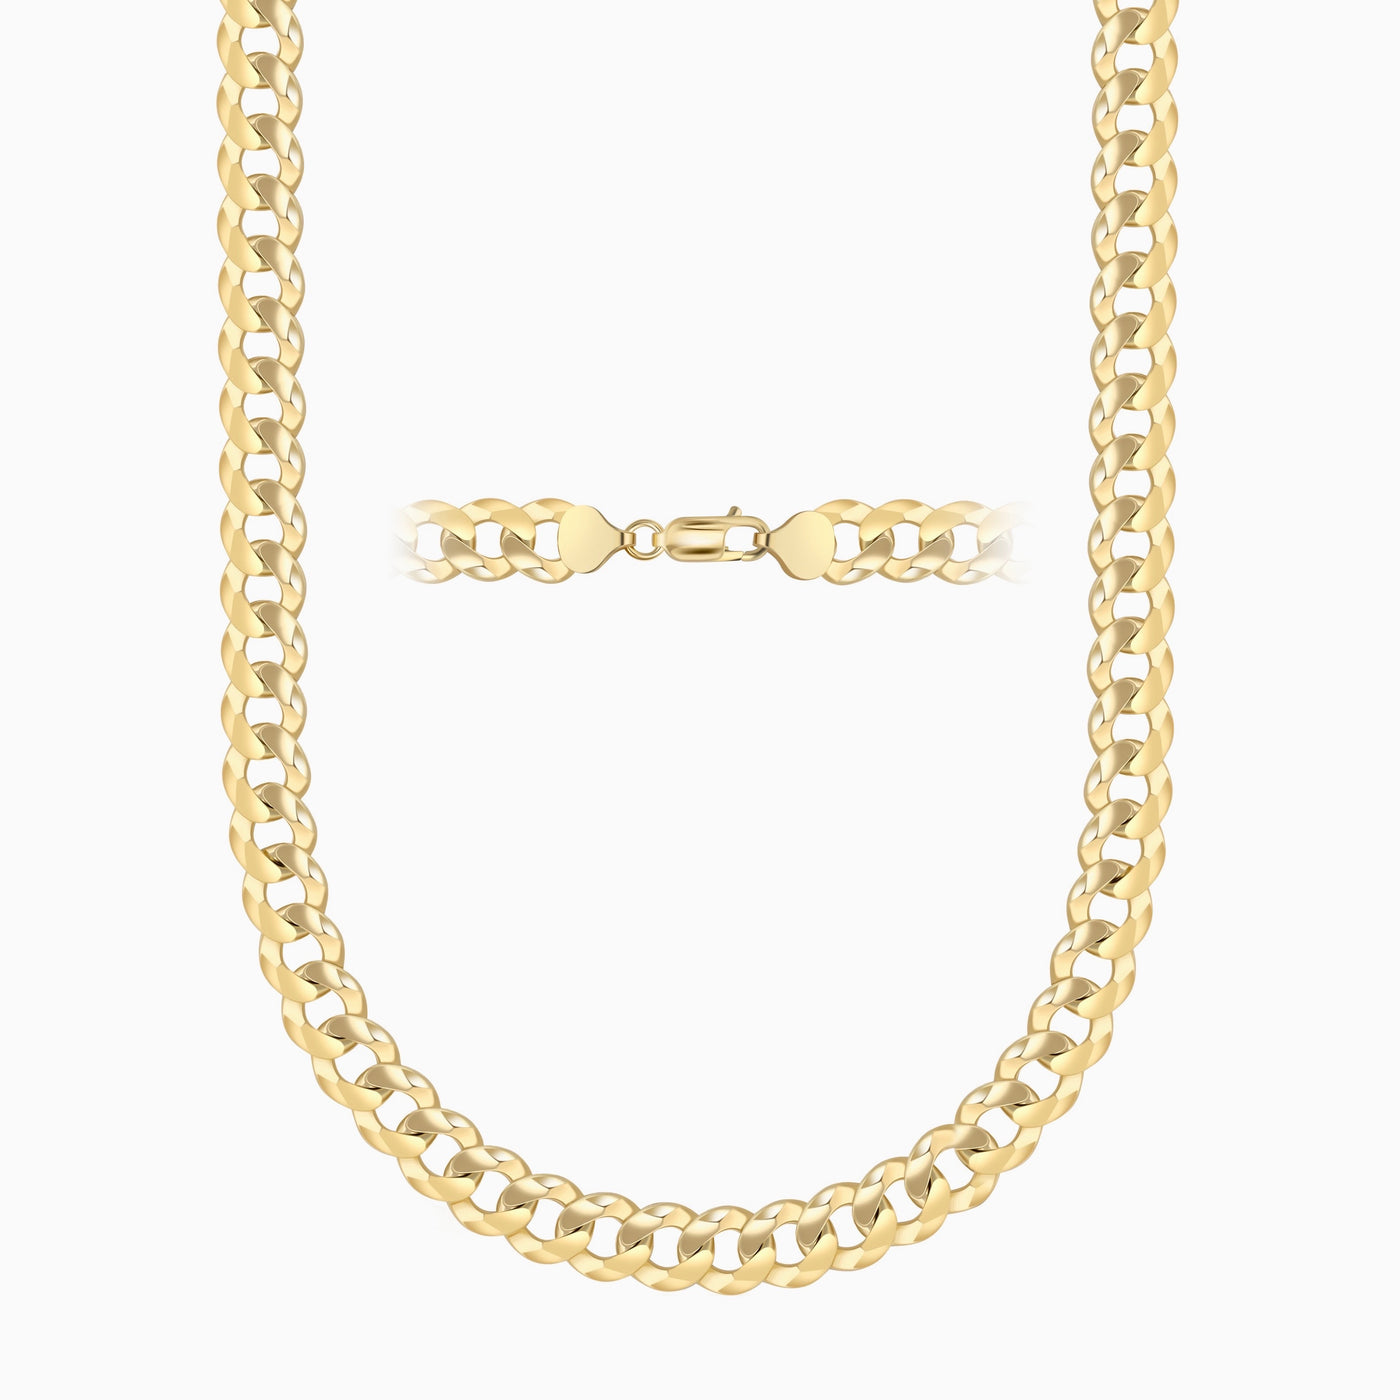 10K Gold Hollow Cuban/Curb Link Chain Necklaces